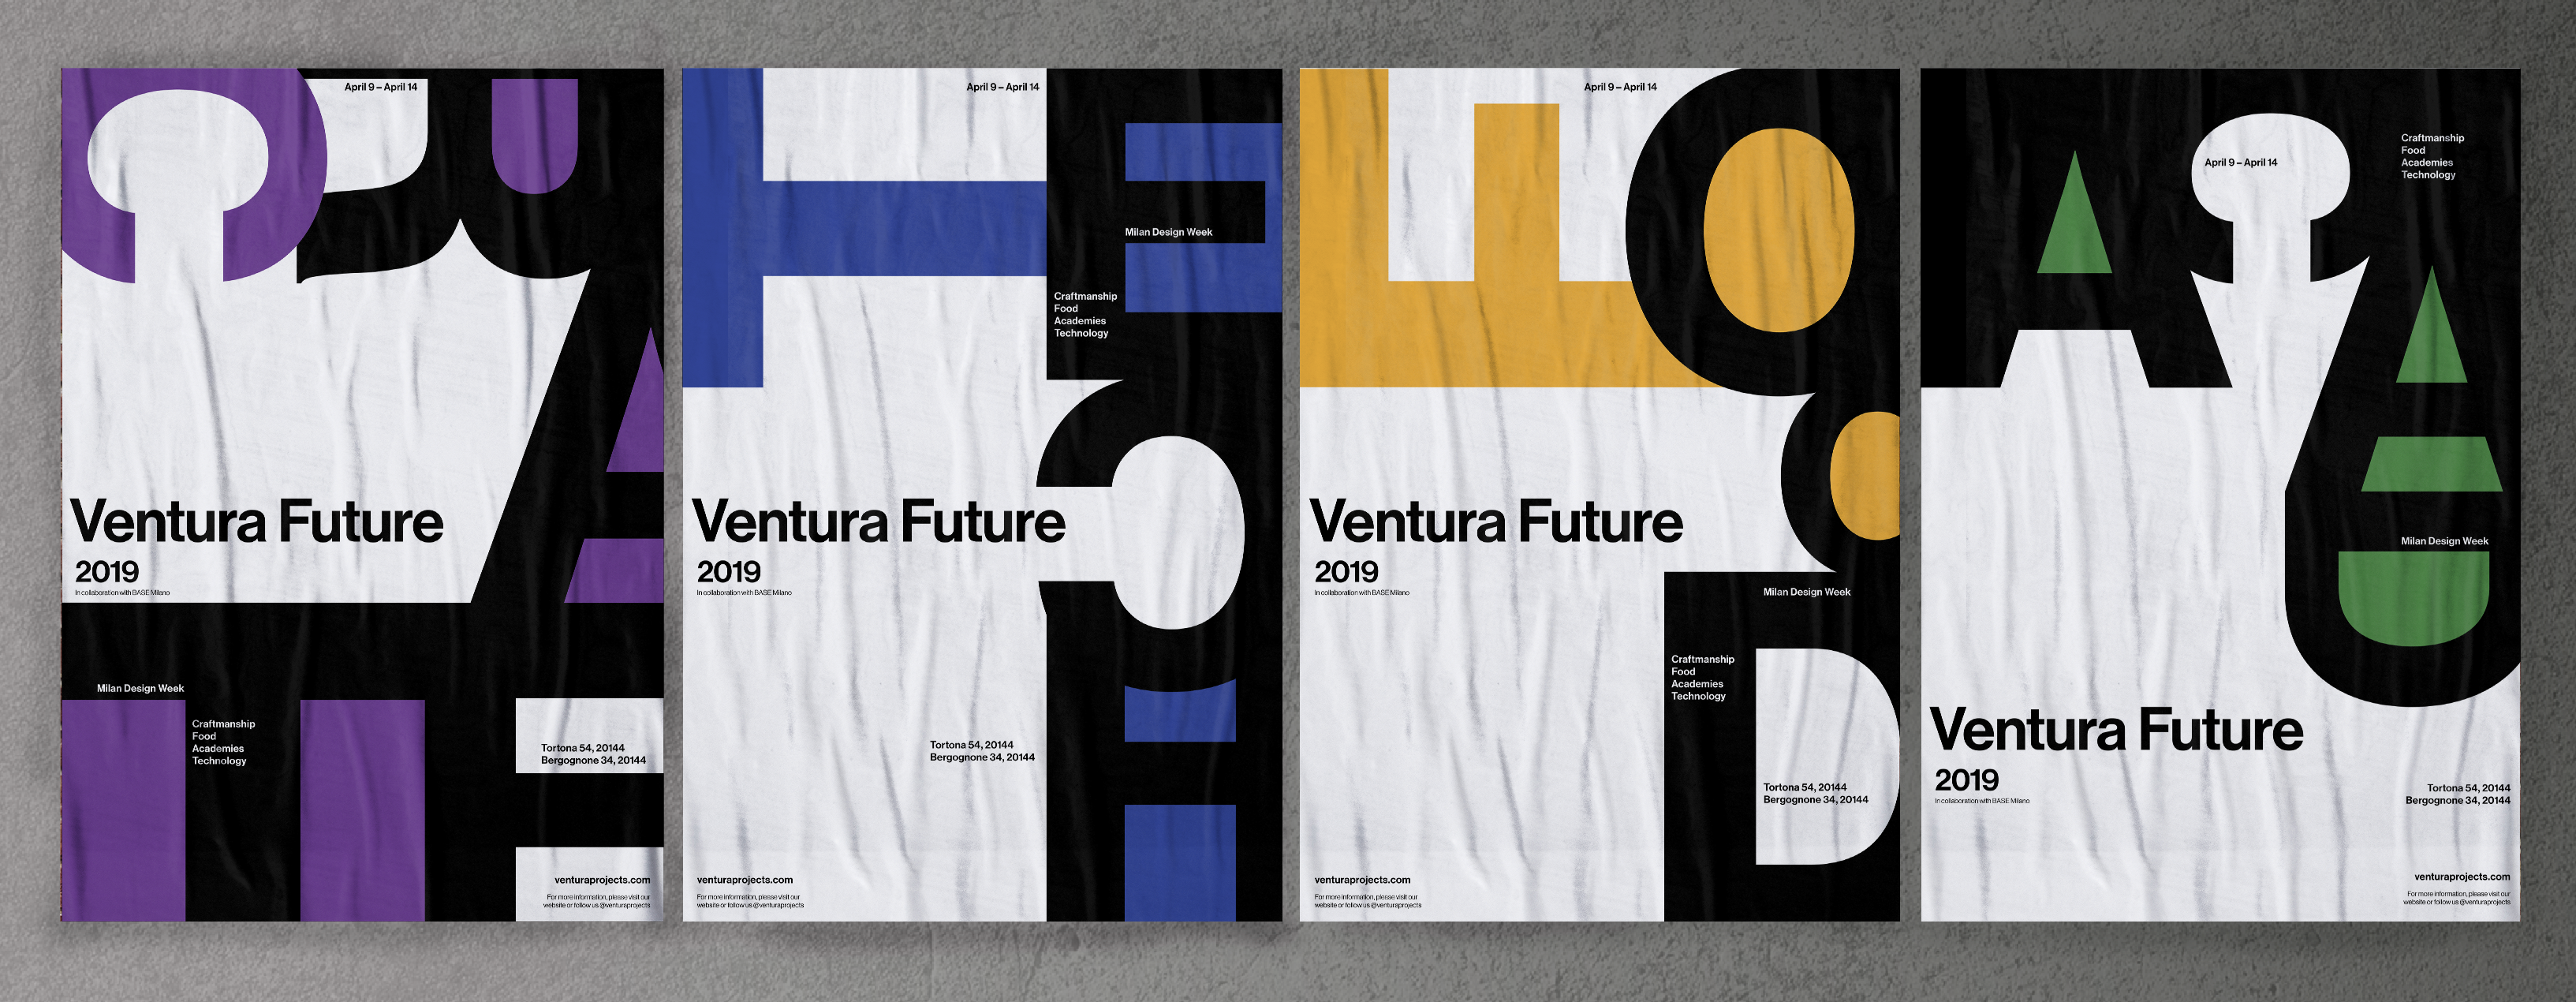 Image of the finalized posters for Ventura Future